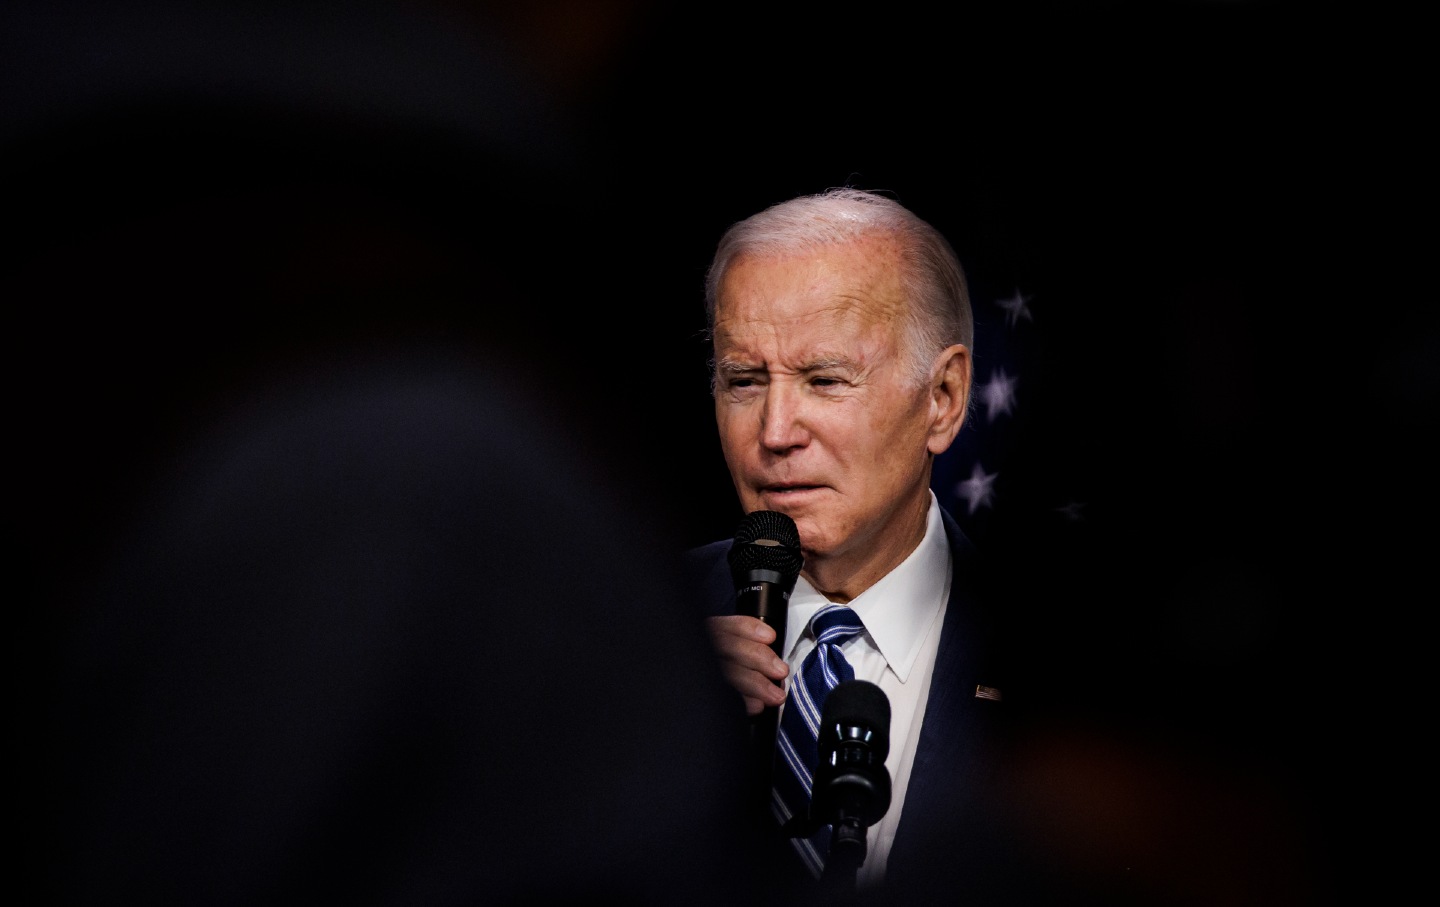 US President Joe Biden speaks to the Democratic National Committee at an event in Washington, D.C., on November 10, 2022.